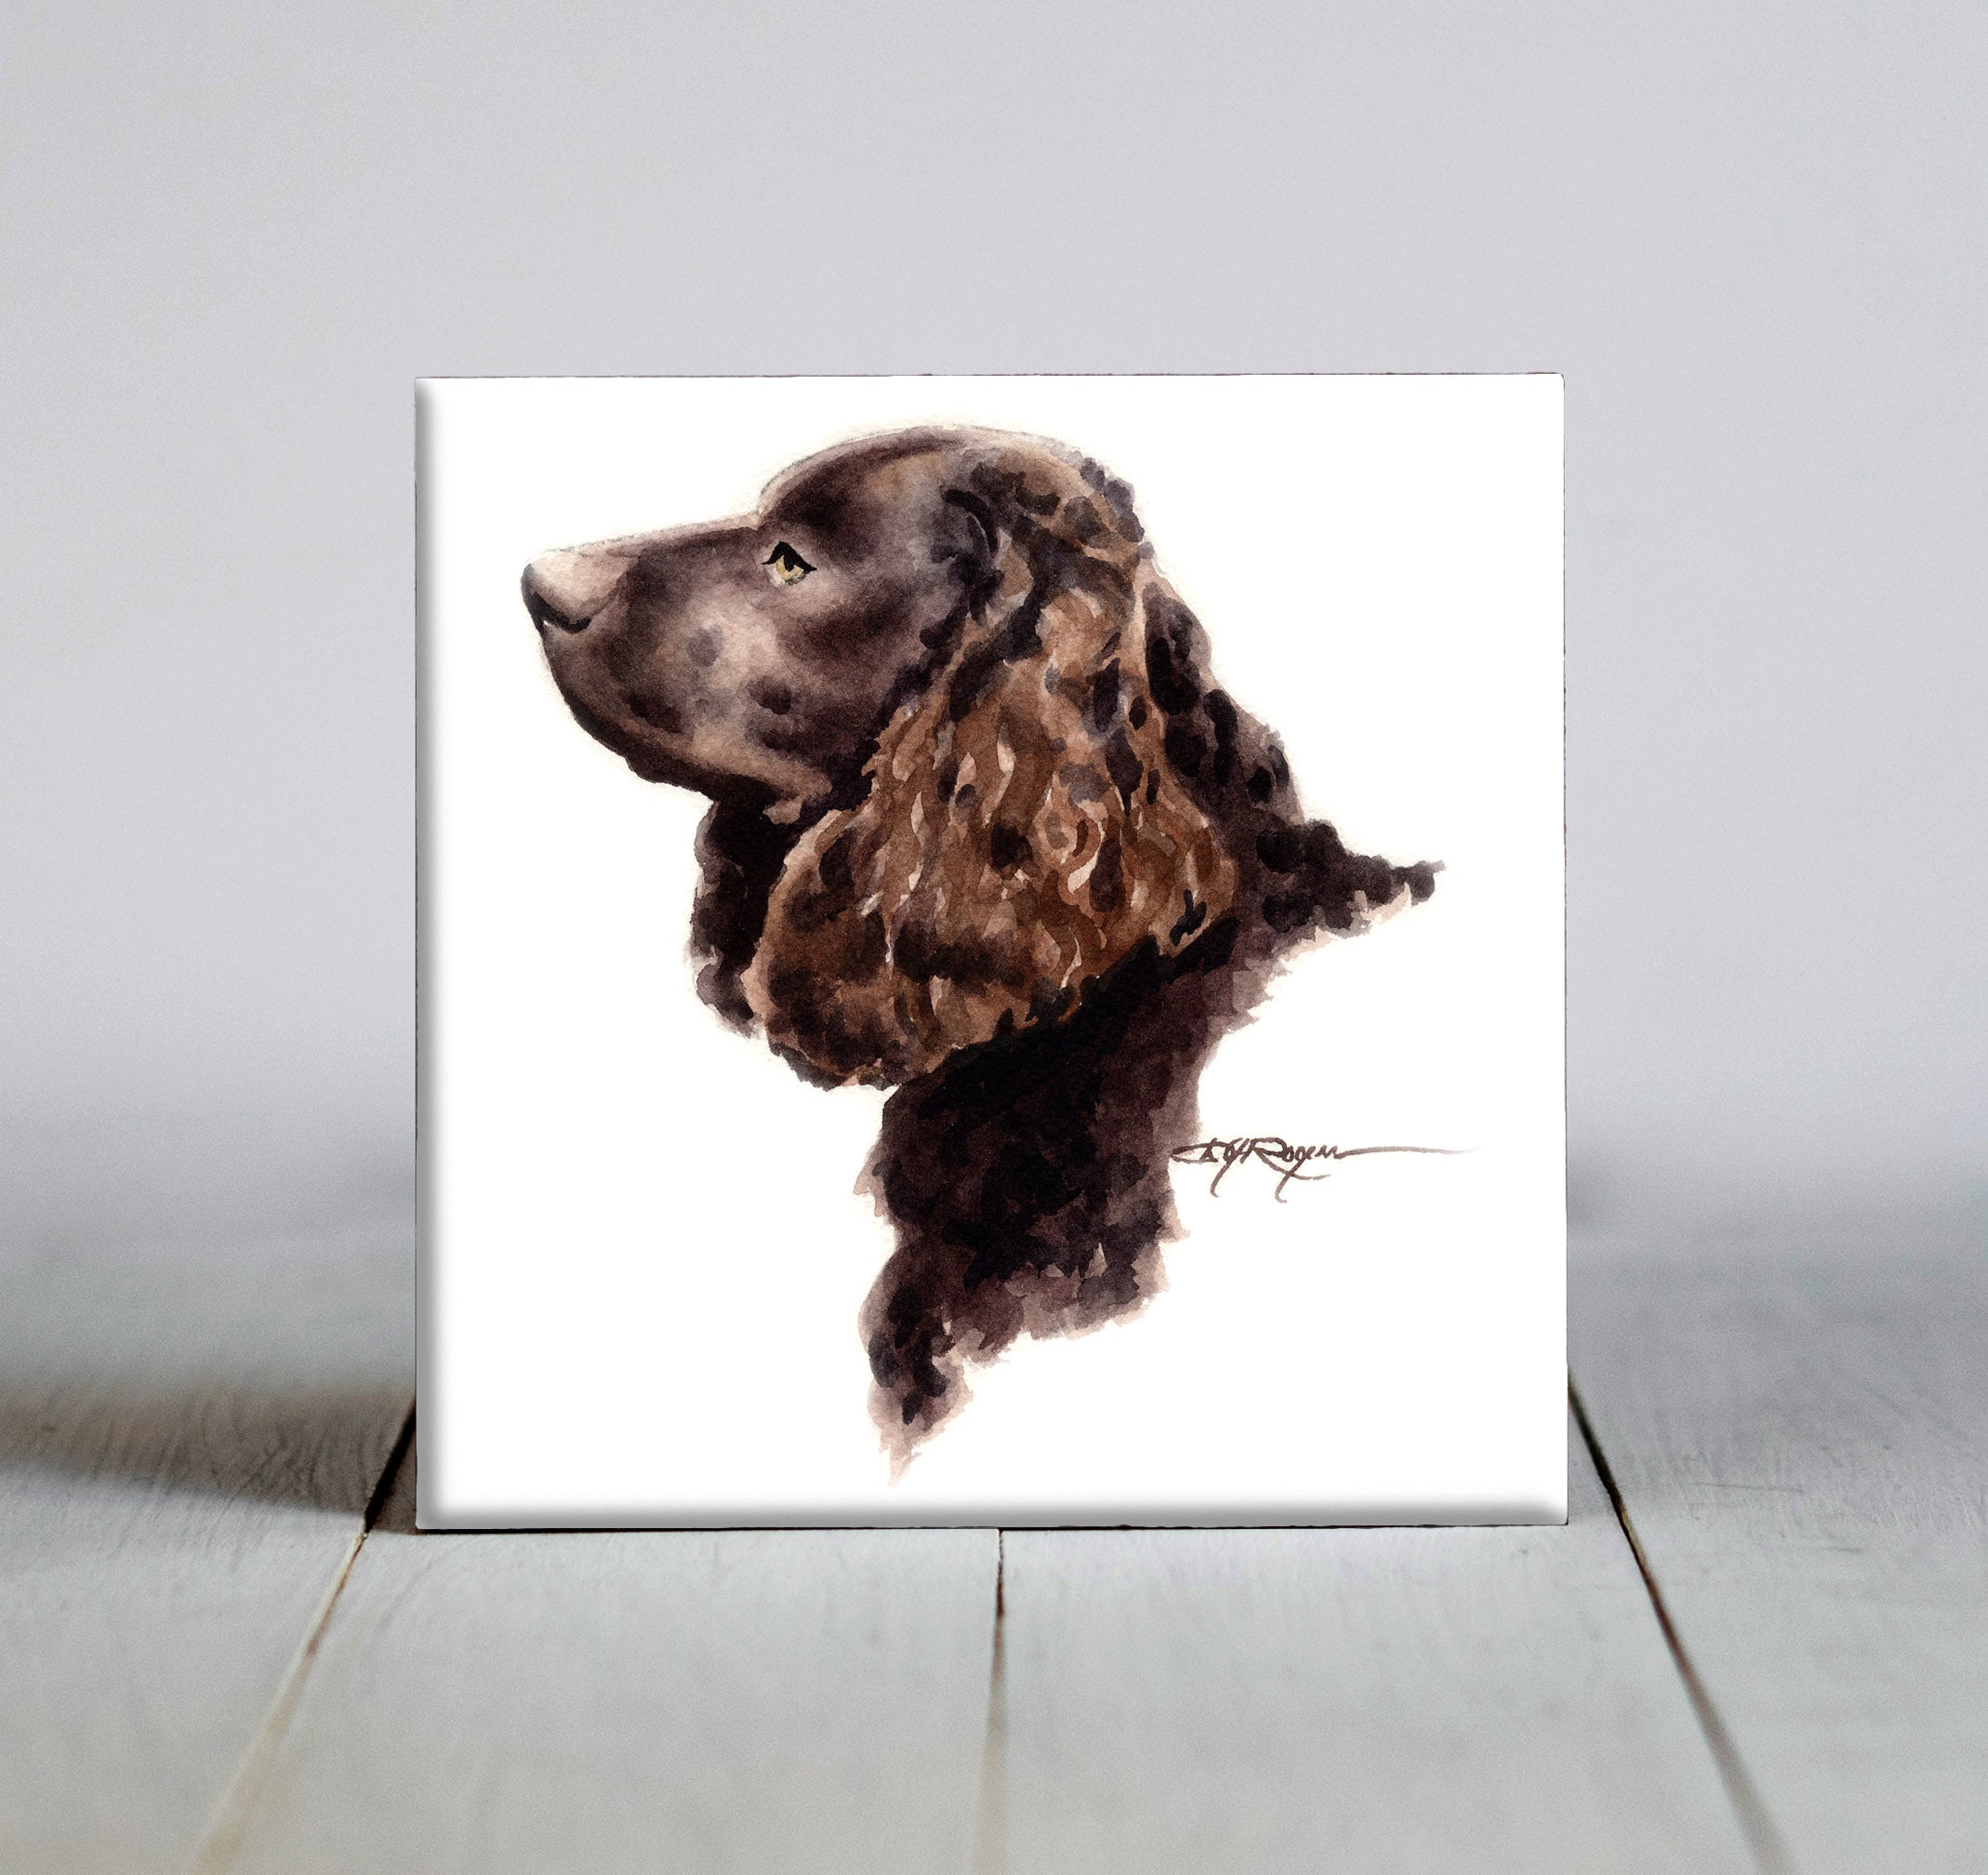 American Water Spaniel Traditional Watercolor Dog Art Decorative Tile by Artist DJ Rogers